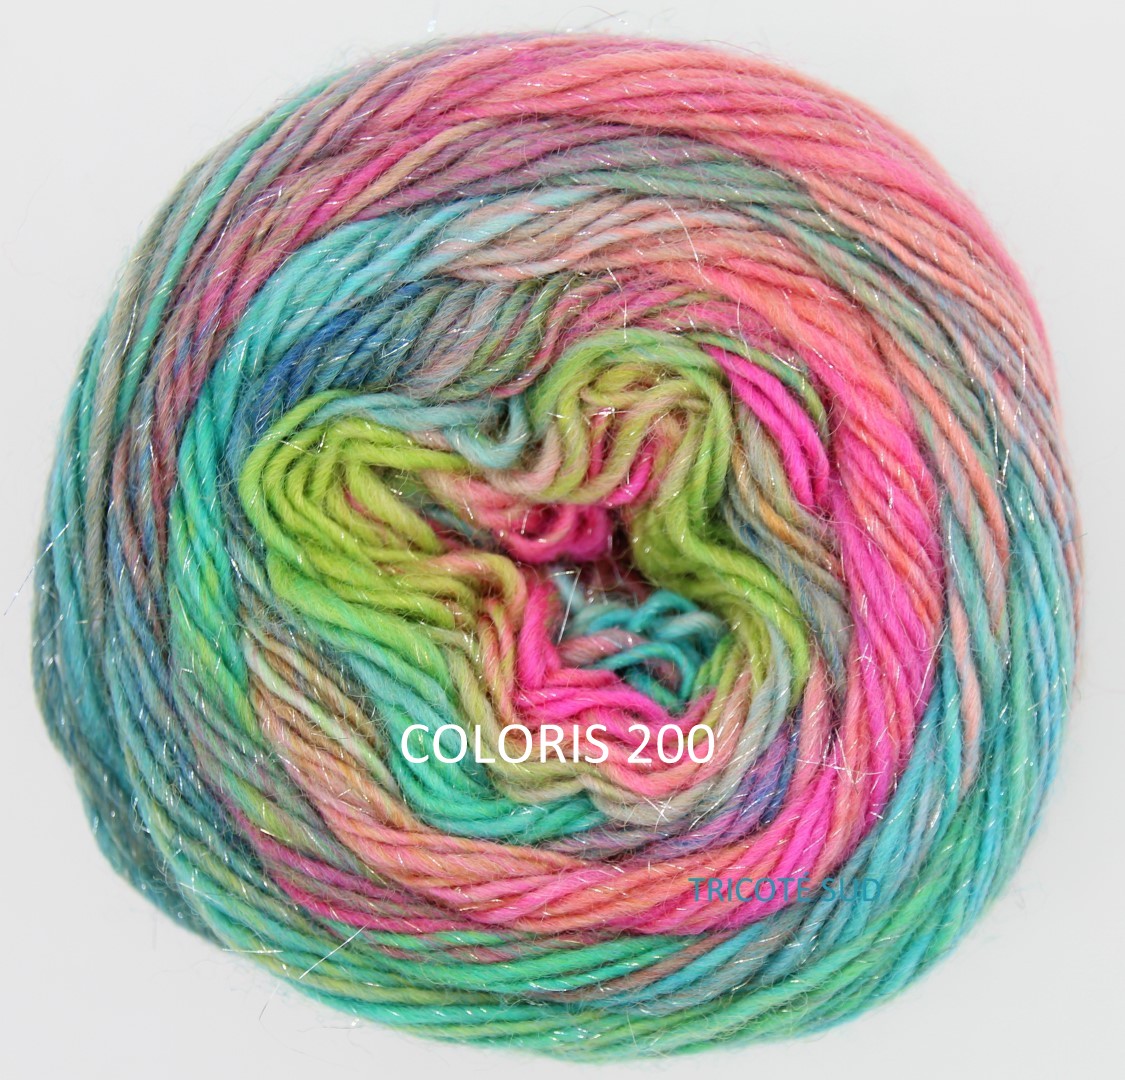 MILLE COLORI SOCKS AND LACE LUXE LANG YARNS COLORIS 200 (2) (Large)